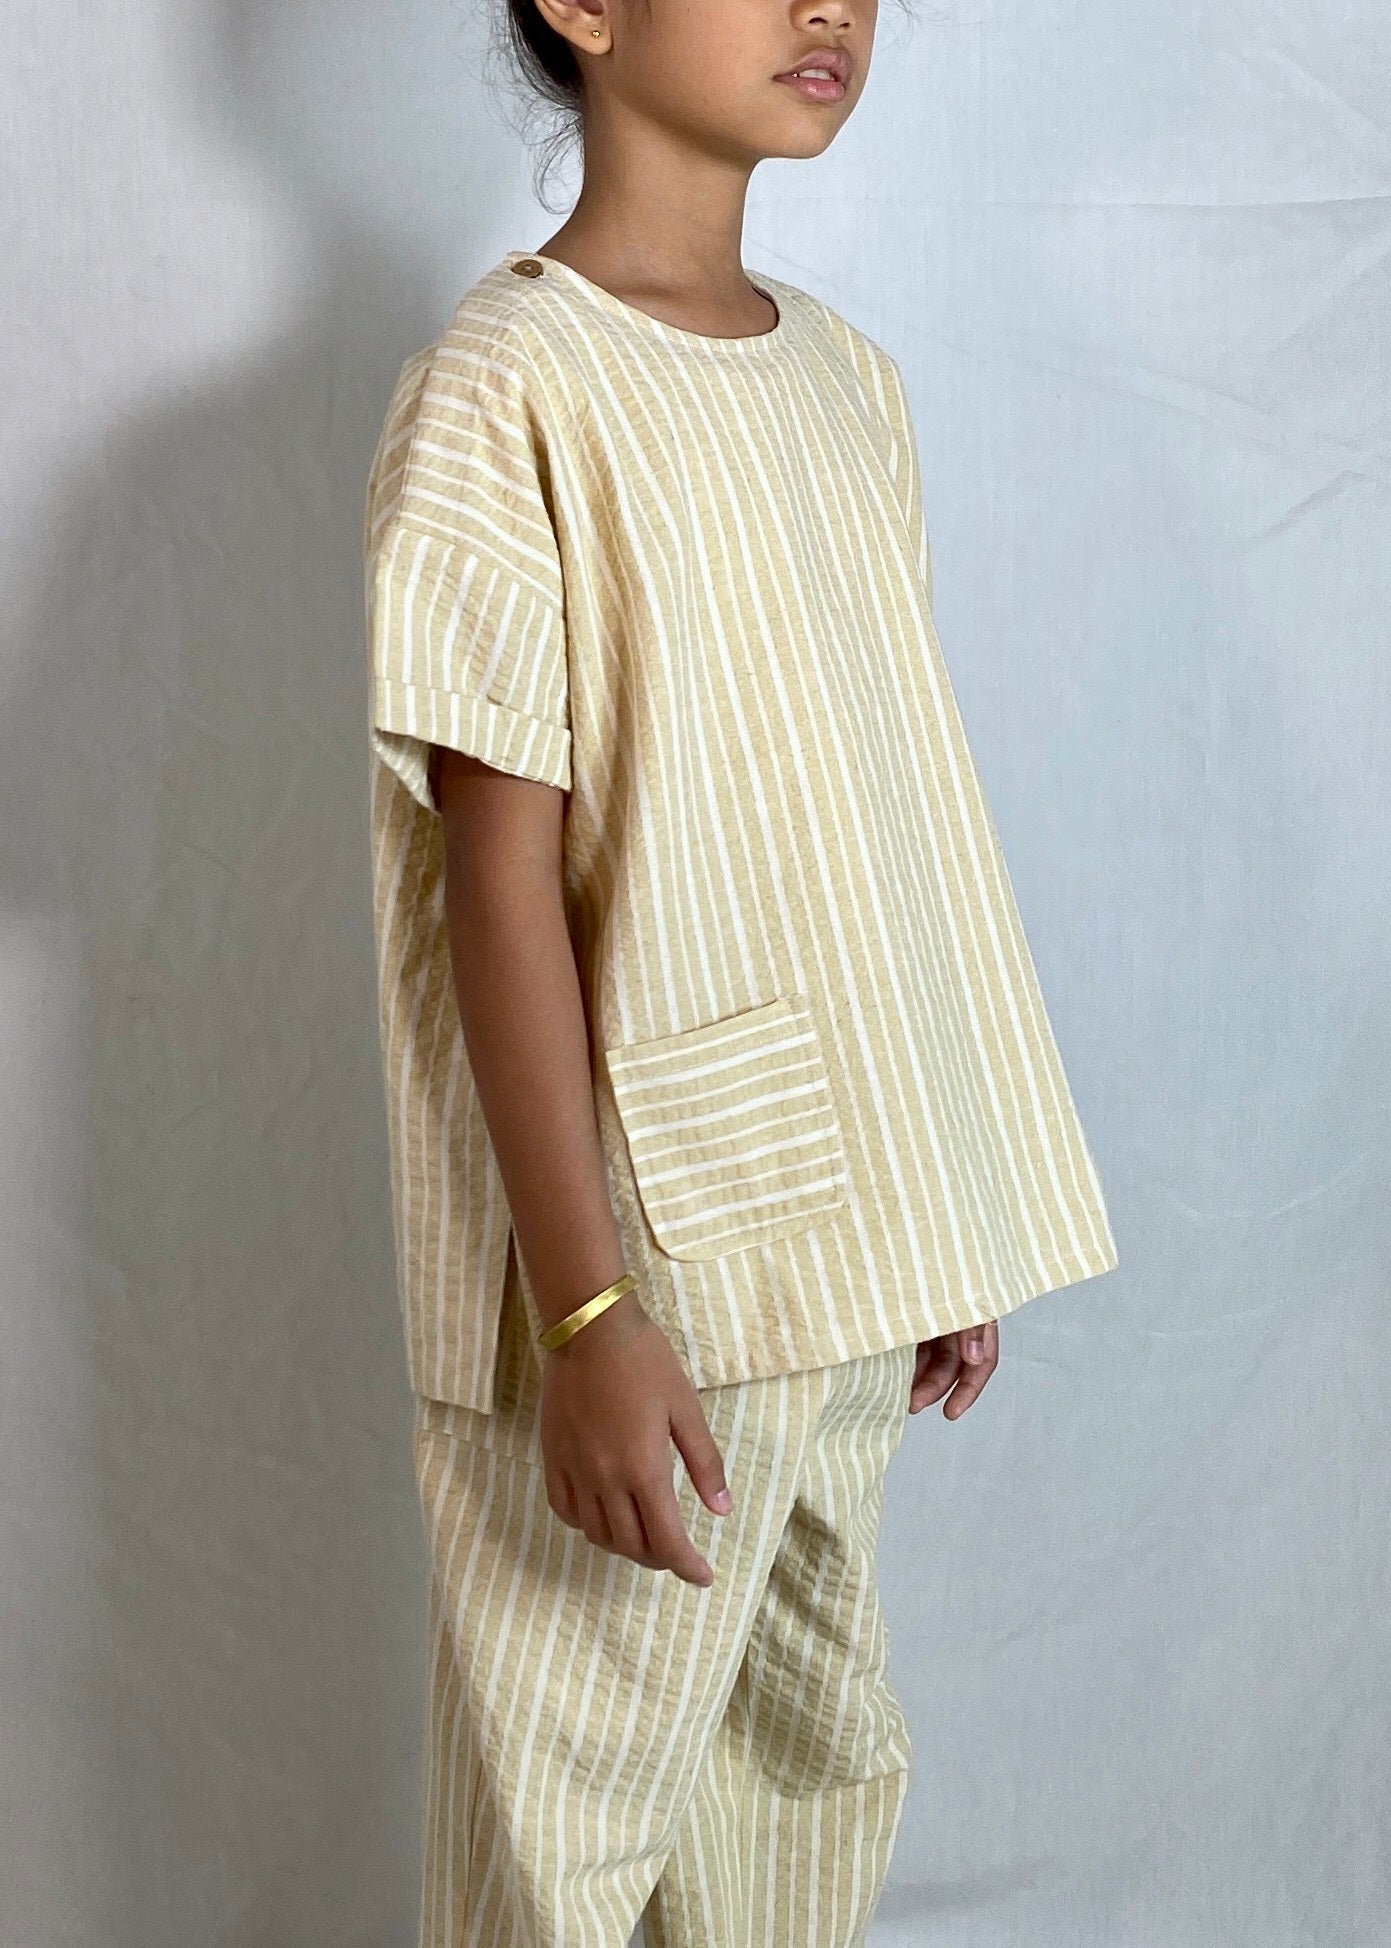 Riang Top In Striped Yellow